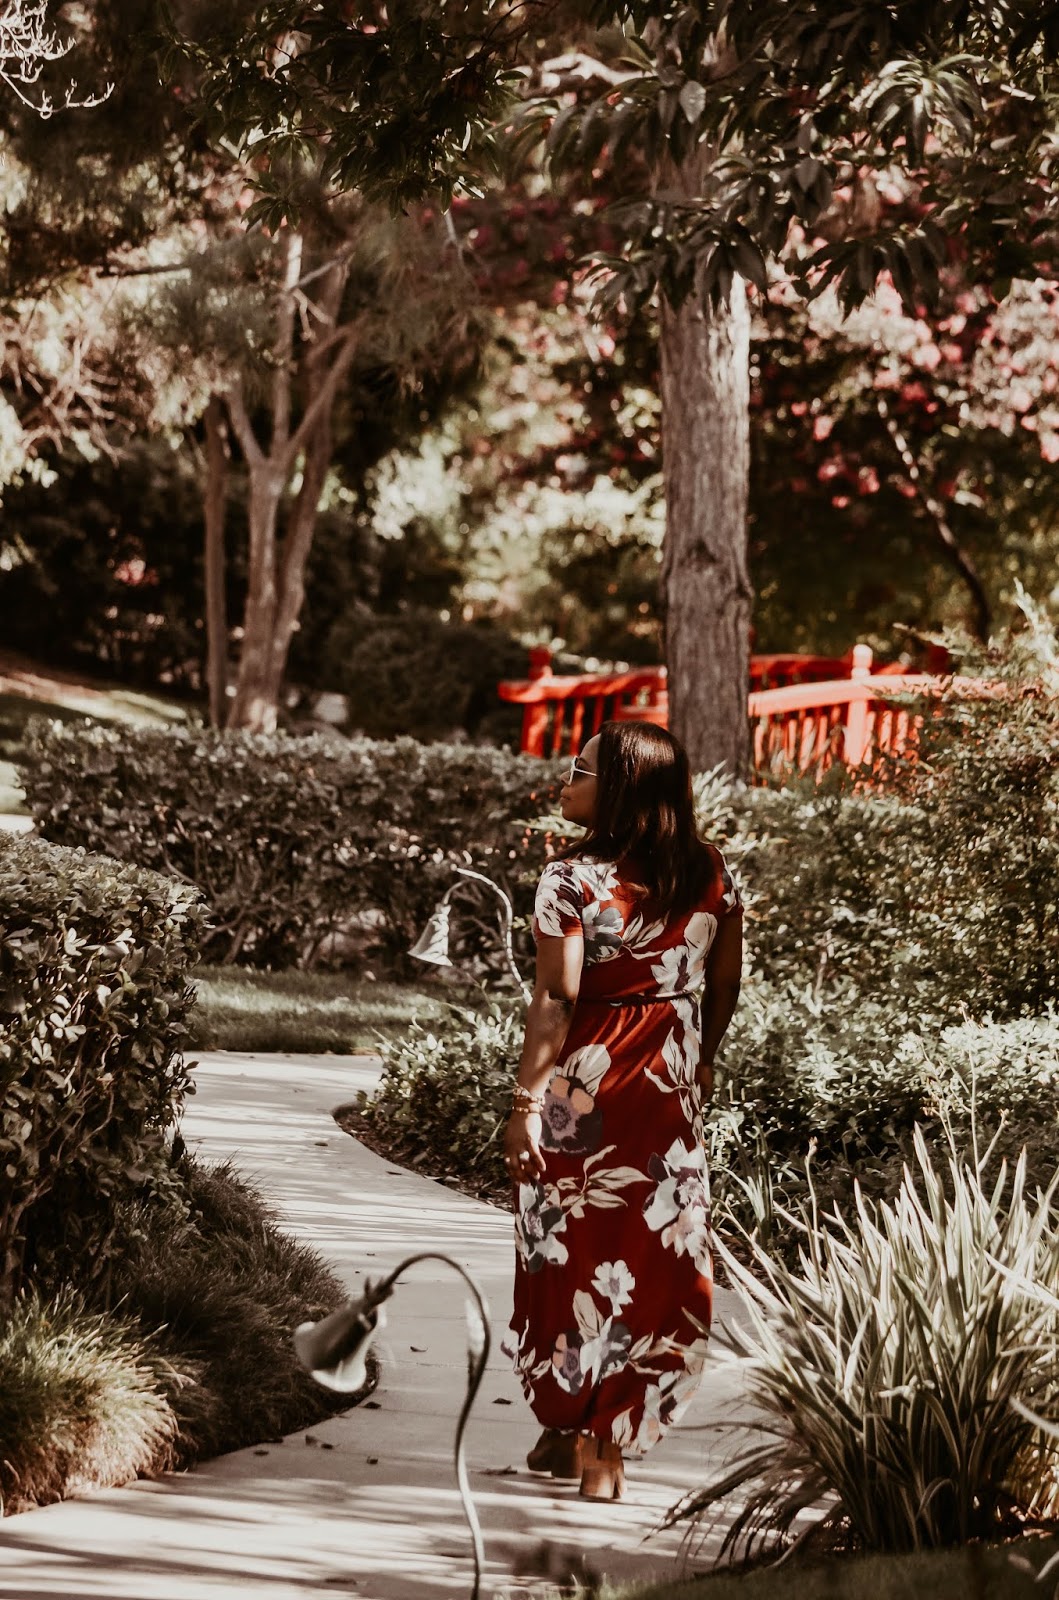 the-most-memorable-end-of-summer2019-staycation-at-the-langham-huntington-hotel-japanese-garden-pasadena-california